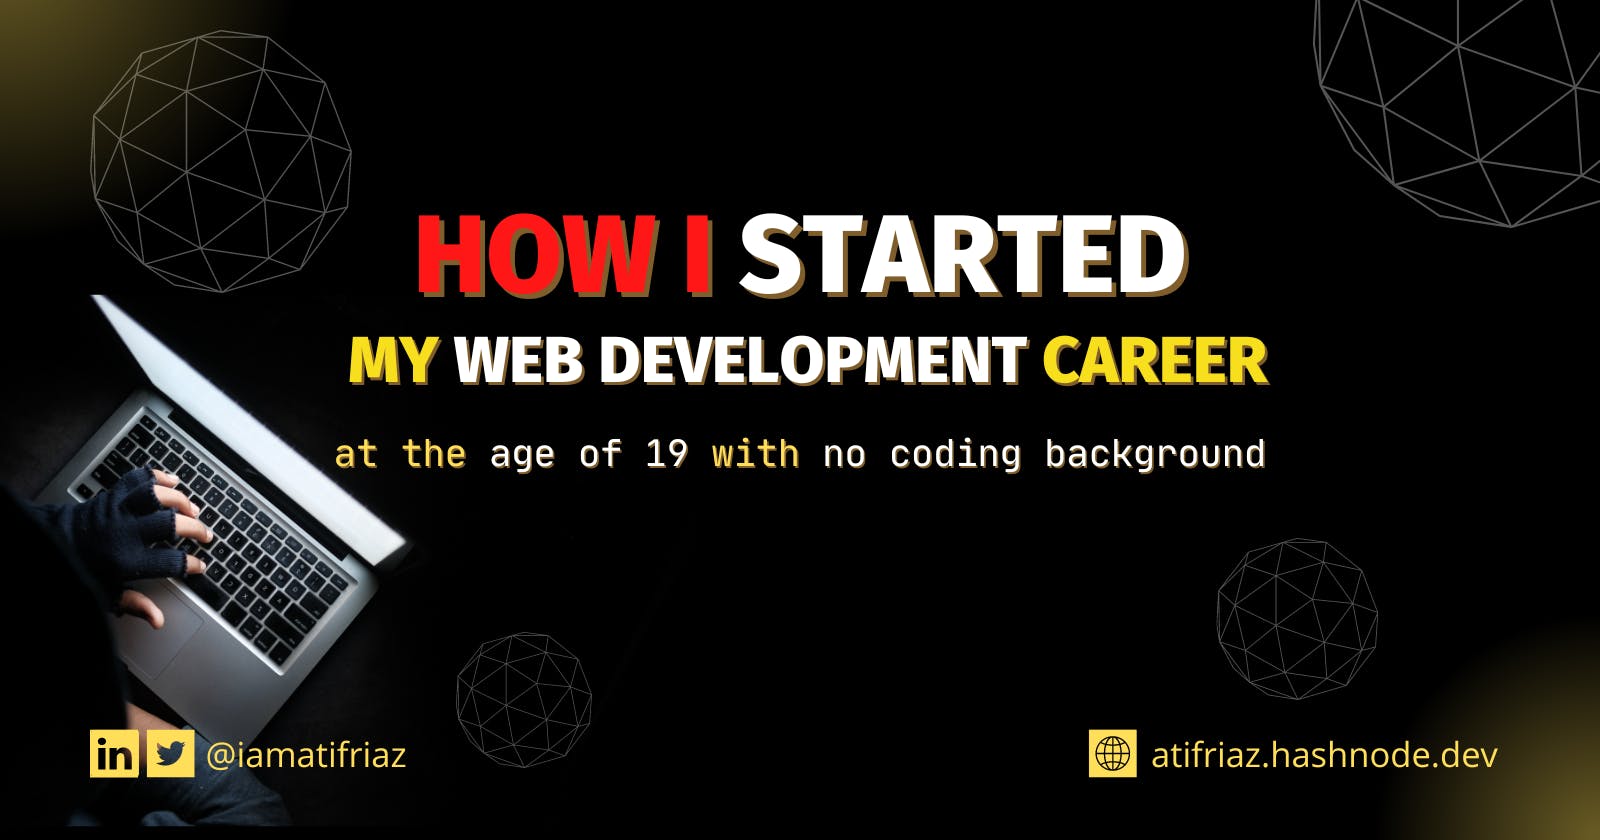 How I started my web development career at the age of 19 with no coding background